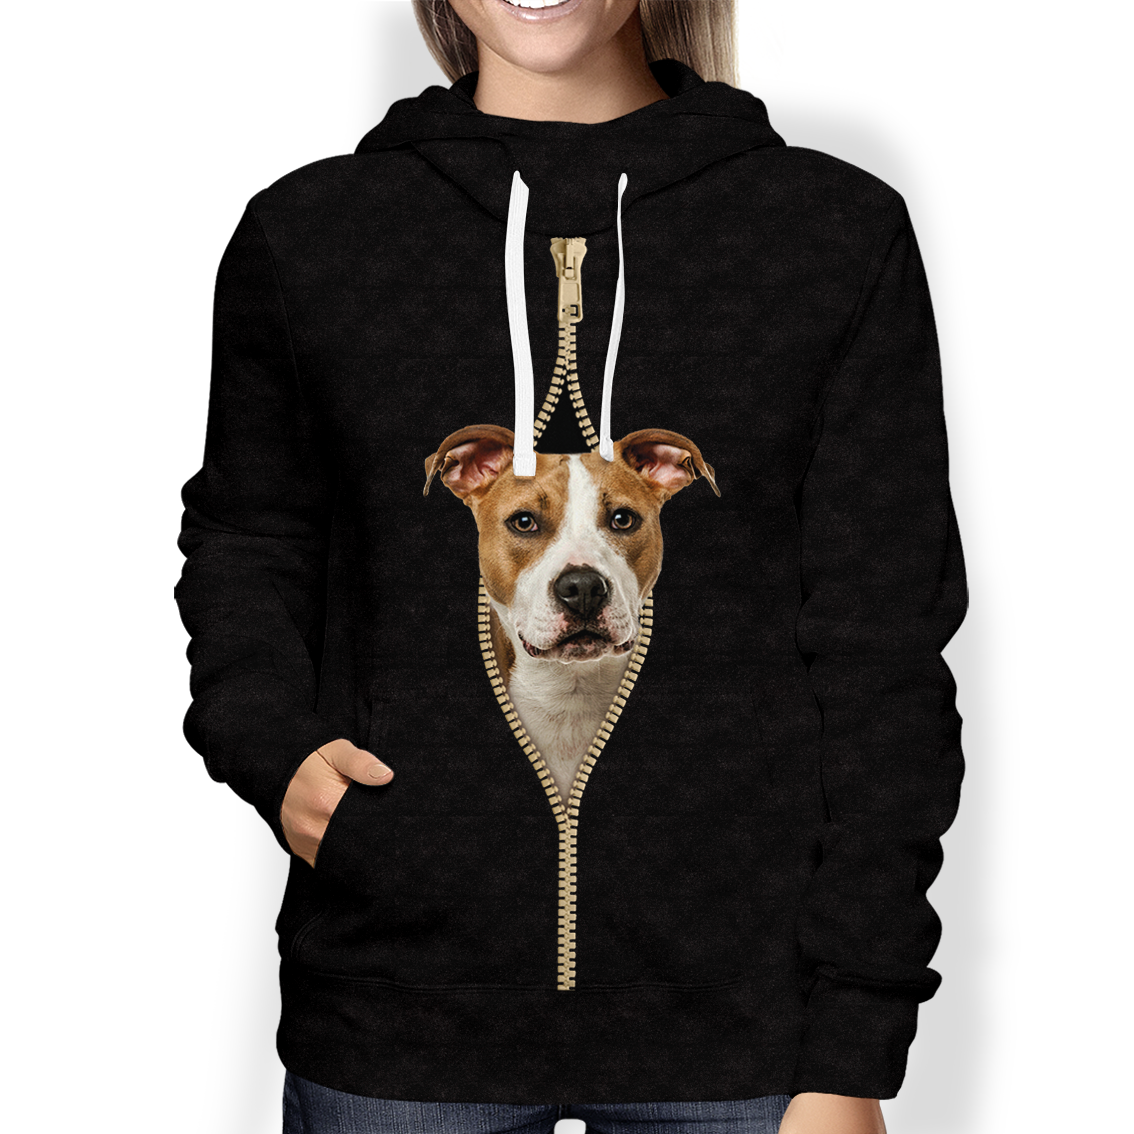 I'm With You - American Staffordshire Terrier Hoodie V4